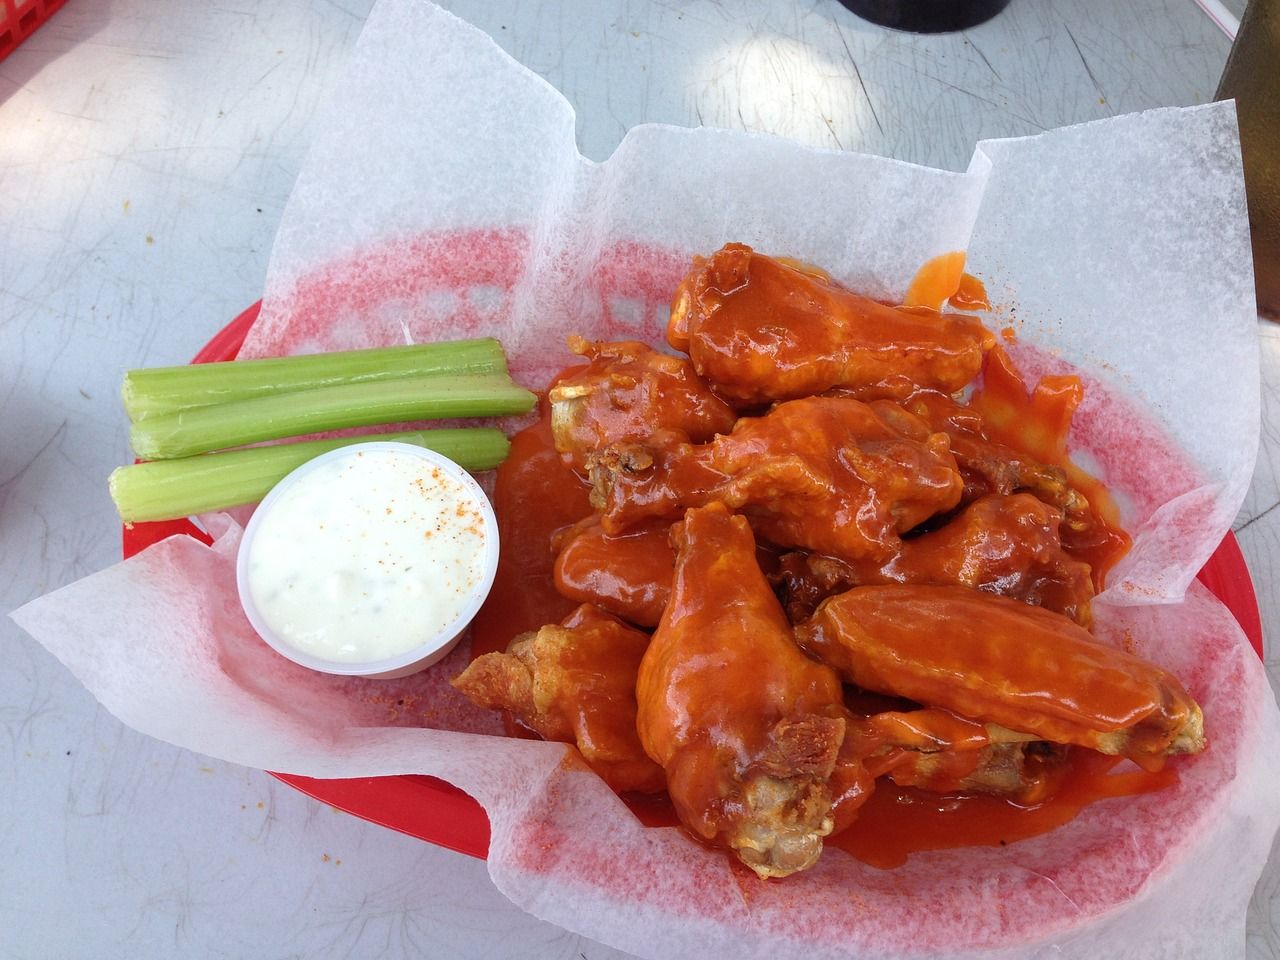 Basket of buffalo wings with a side of celery and blue cheese dressing